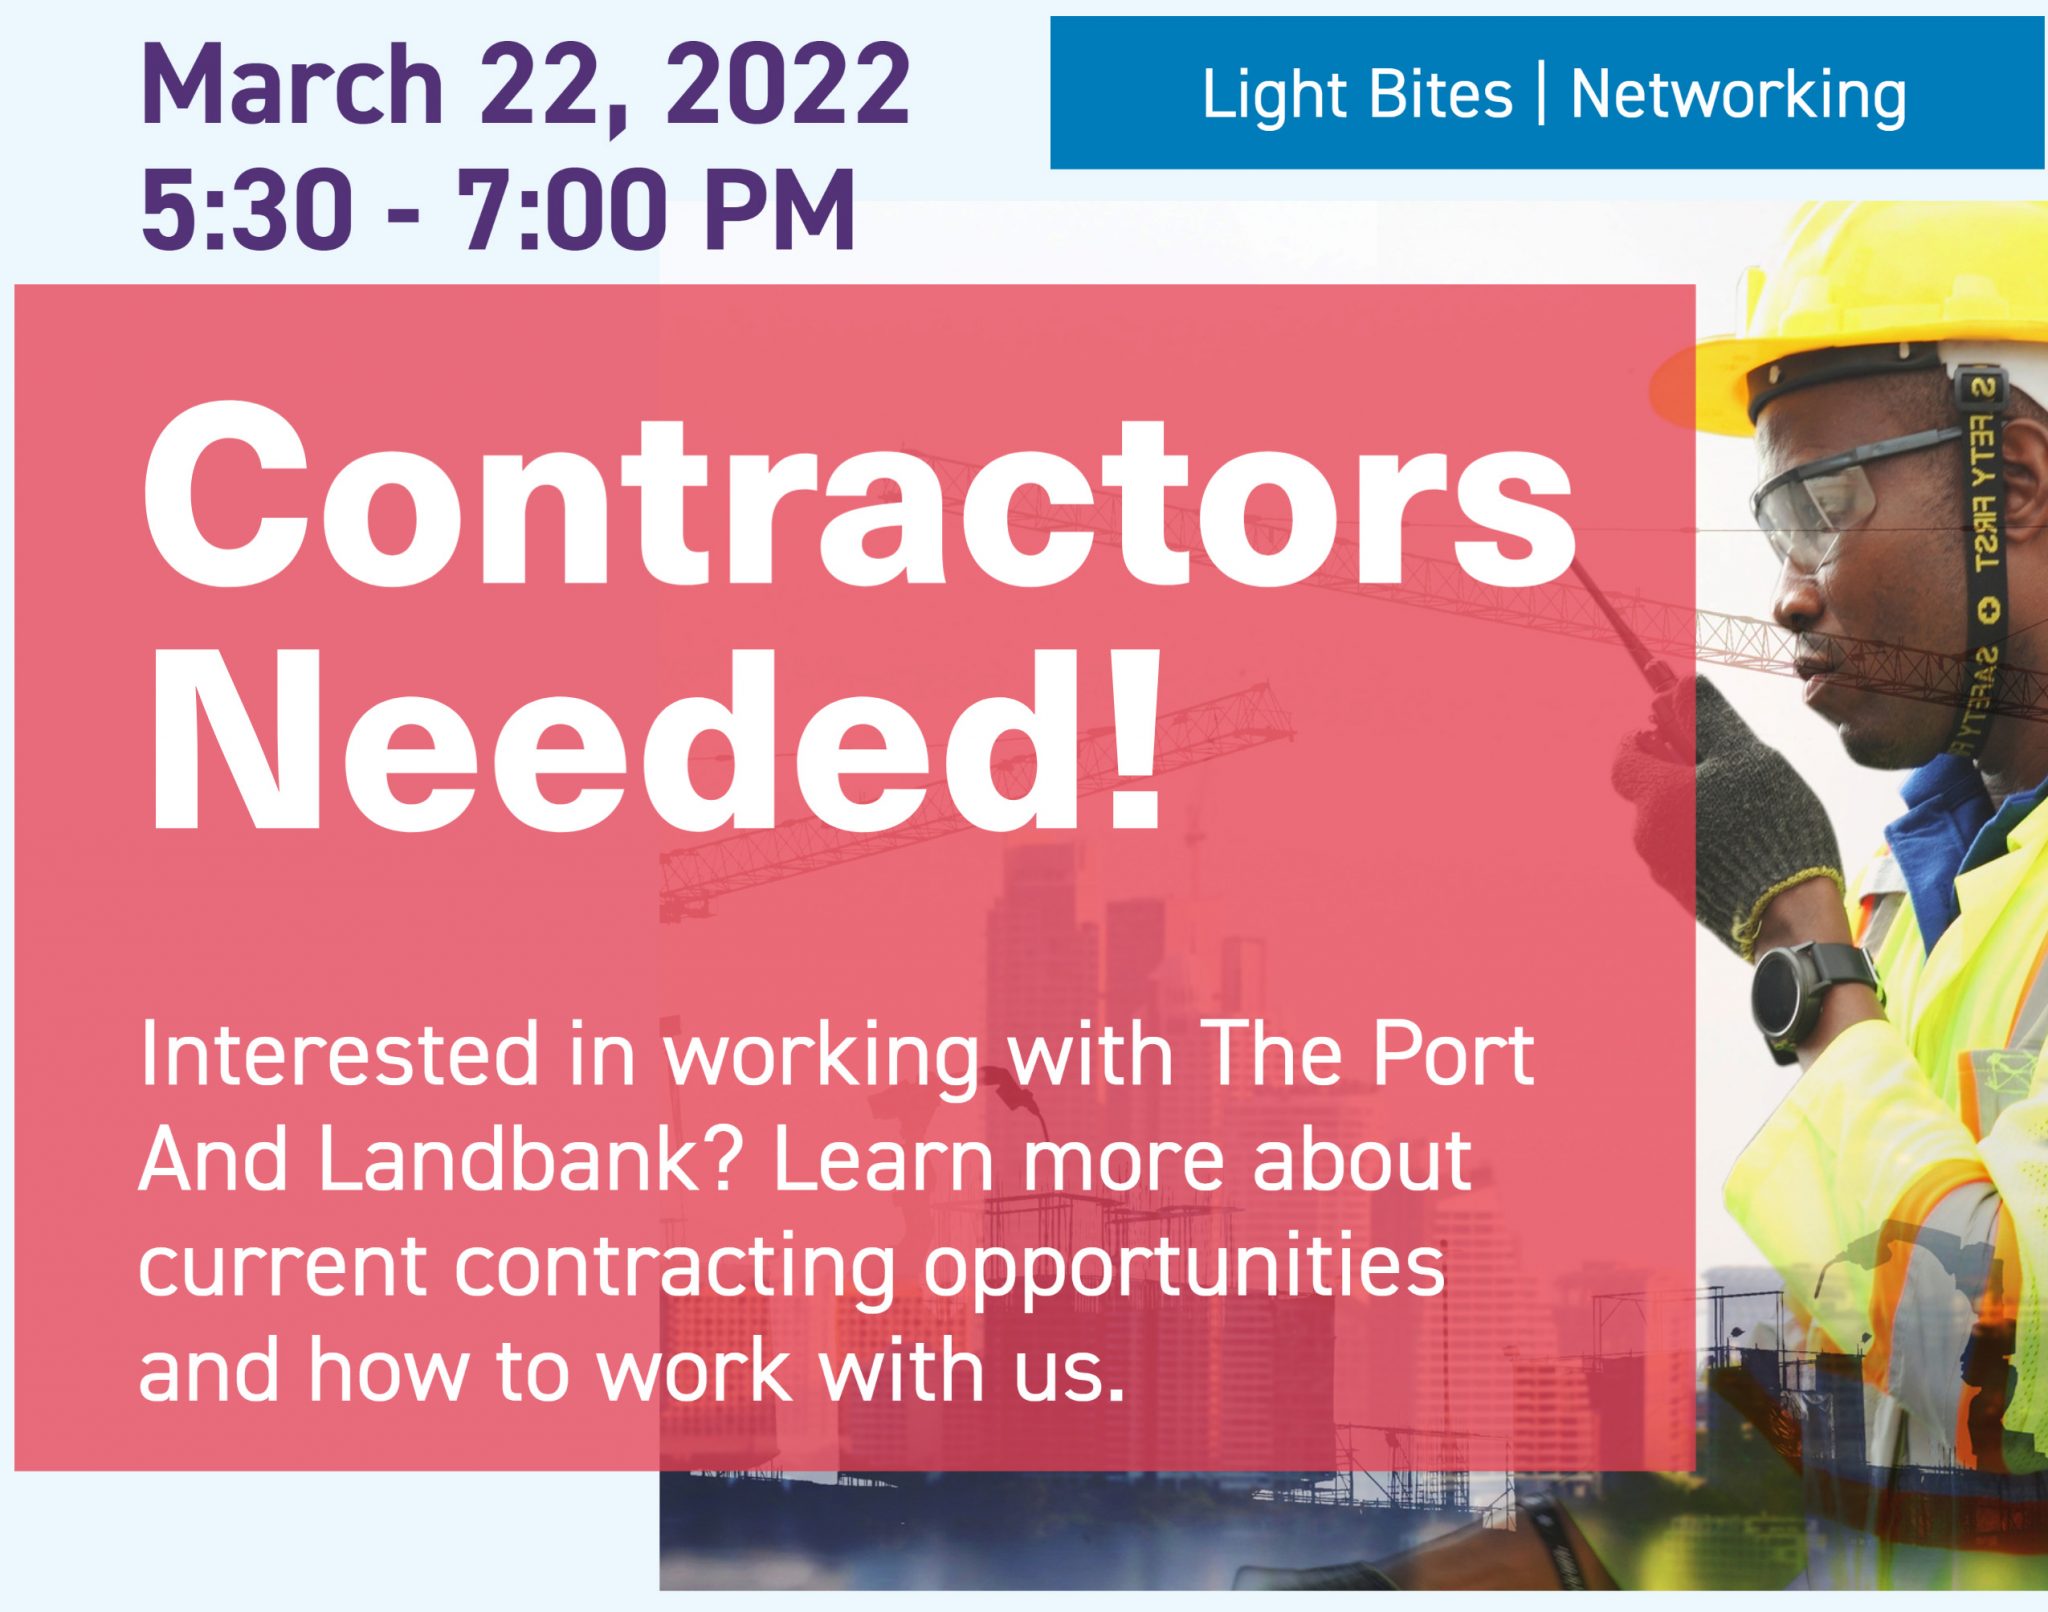 Graphic with event details - Contractors Needed! March 22, 2022 - 5:30-7:30 PM - Light Bites | Networking